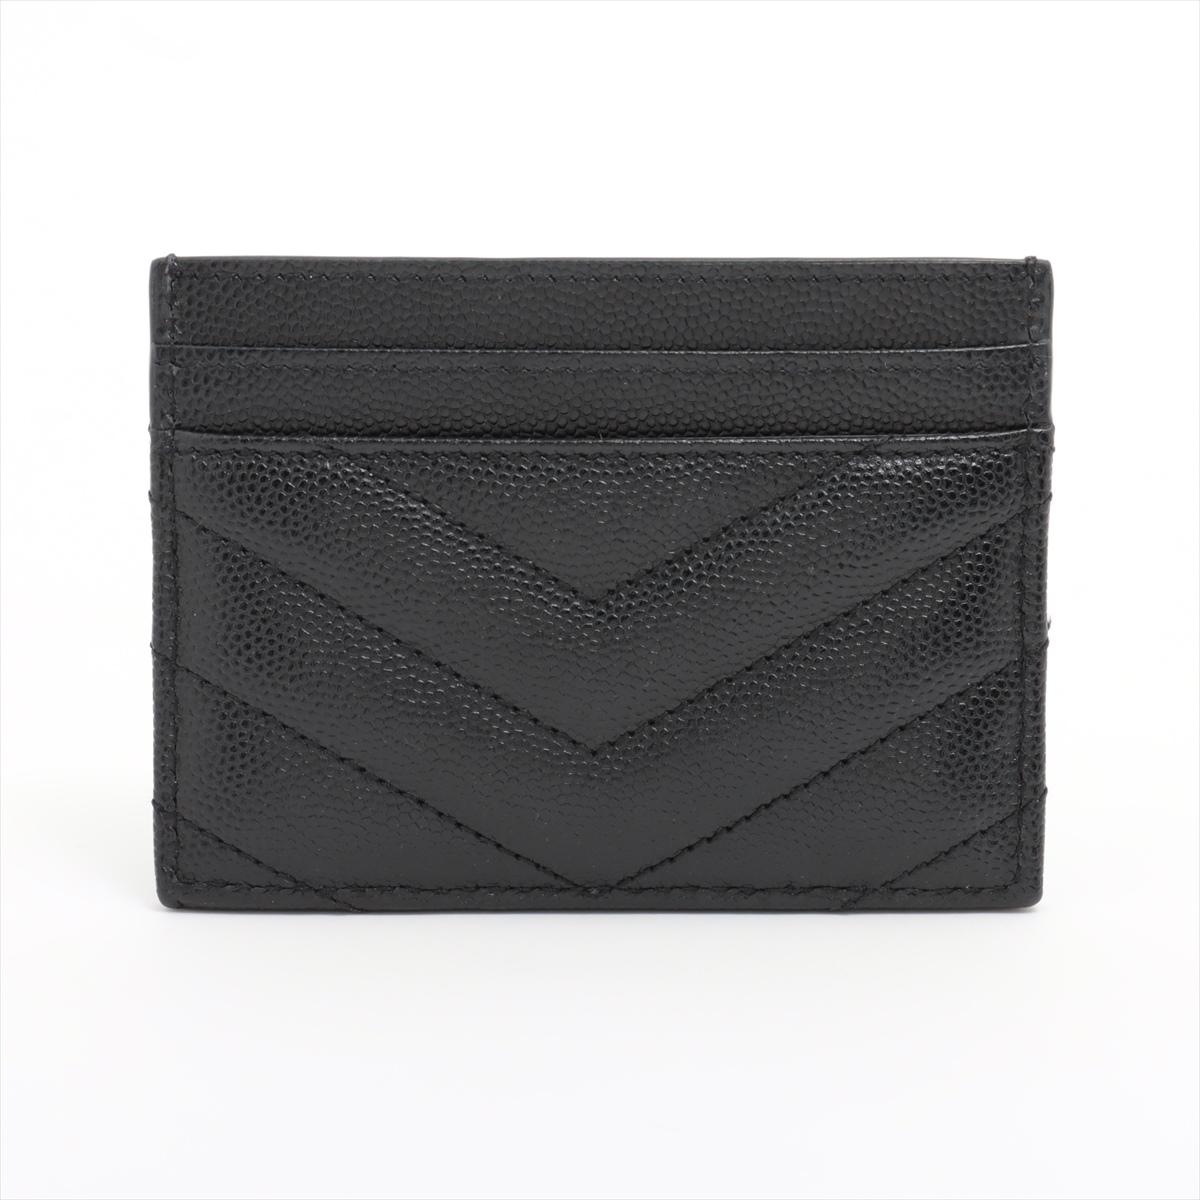 Saint Laurent V Stitch Leather Card Case Black In Good Condition For Sale In Indianapolis, IN